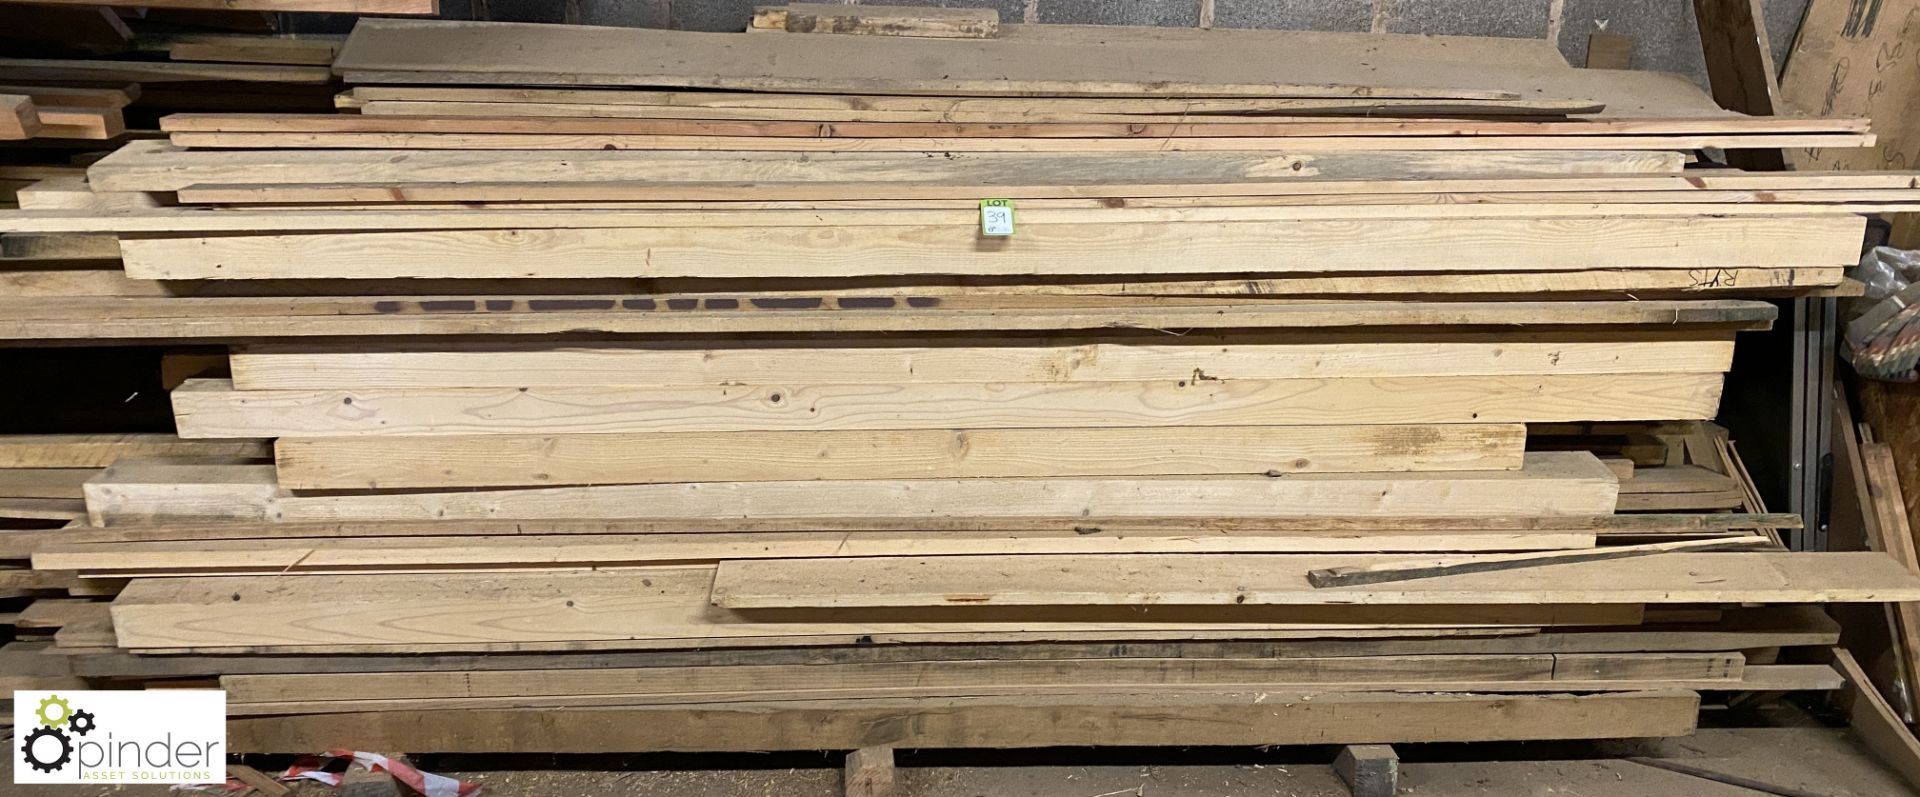 Large quantity Softwood/Hardwood Cut Beams, Boards and Lengths, up to 4000mm - Image 2 of 9